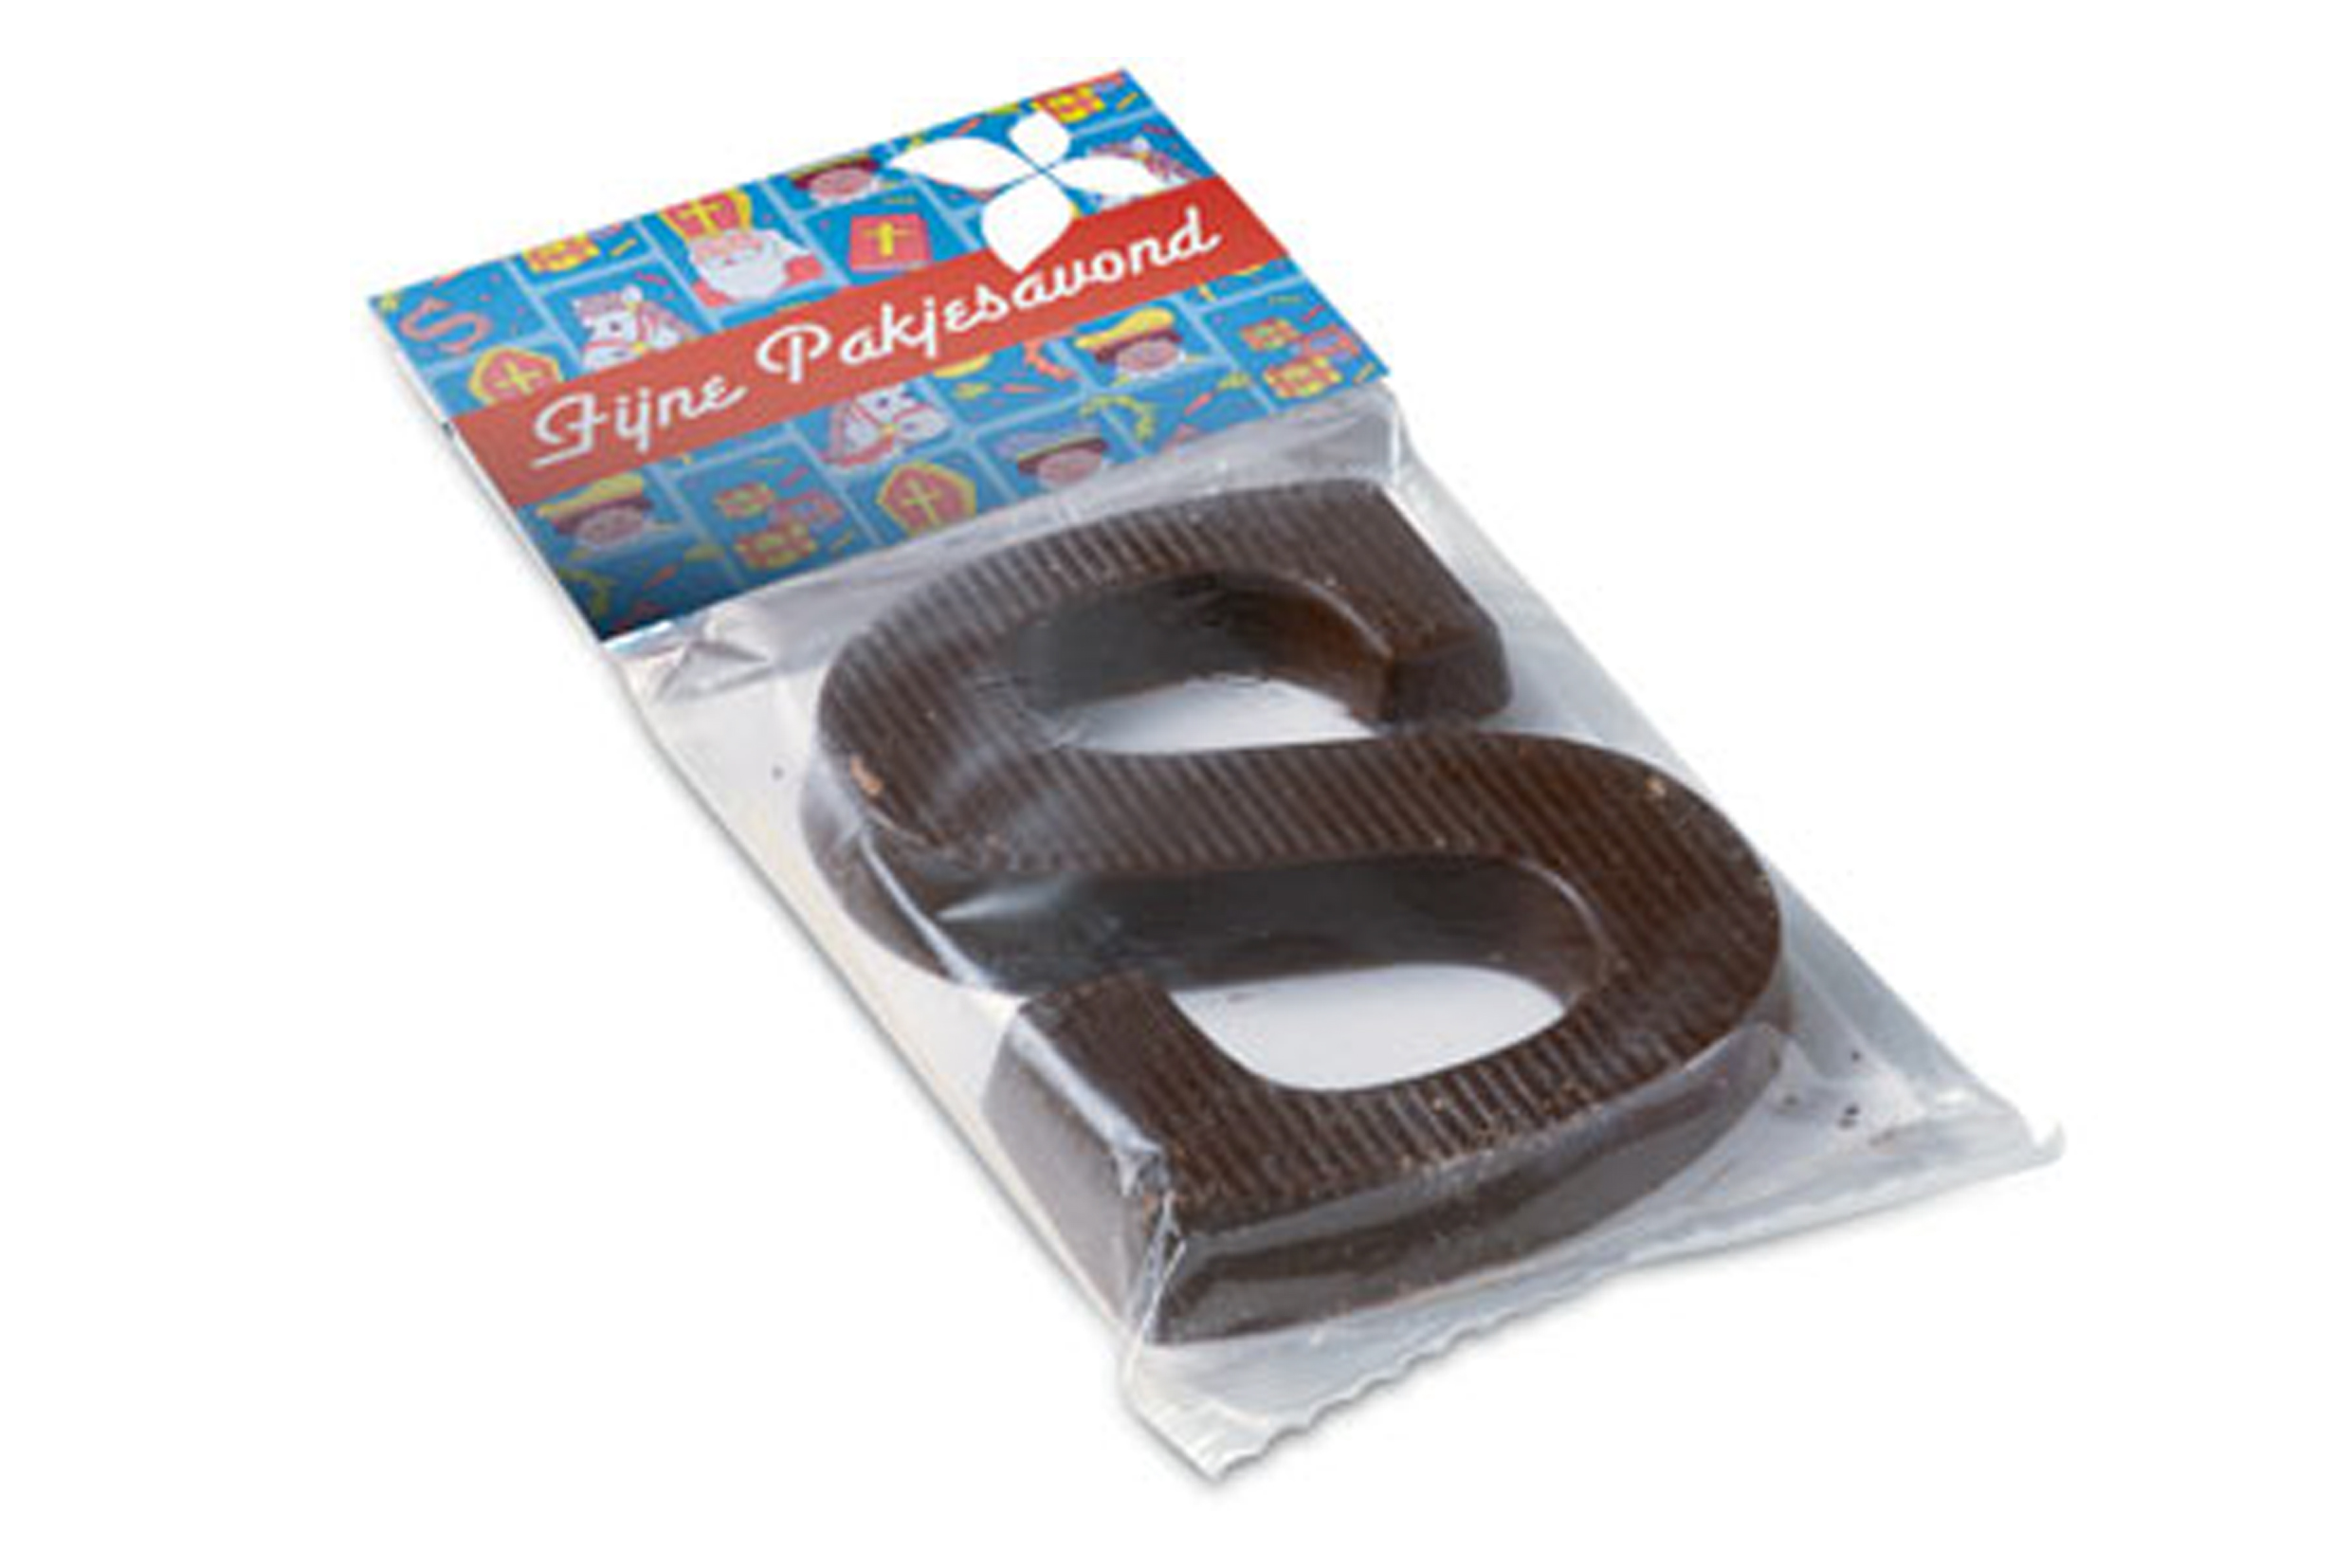 Chocolate Letter Gift Box - Piddletrenthide - Winchester